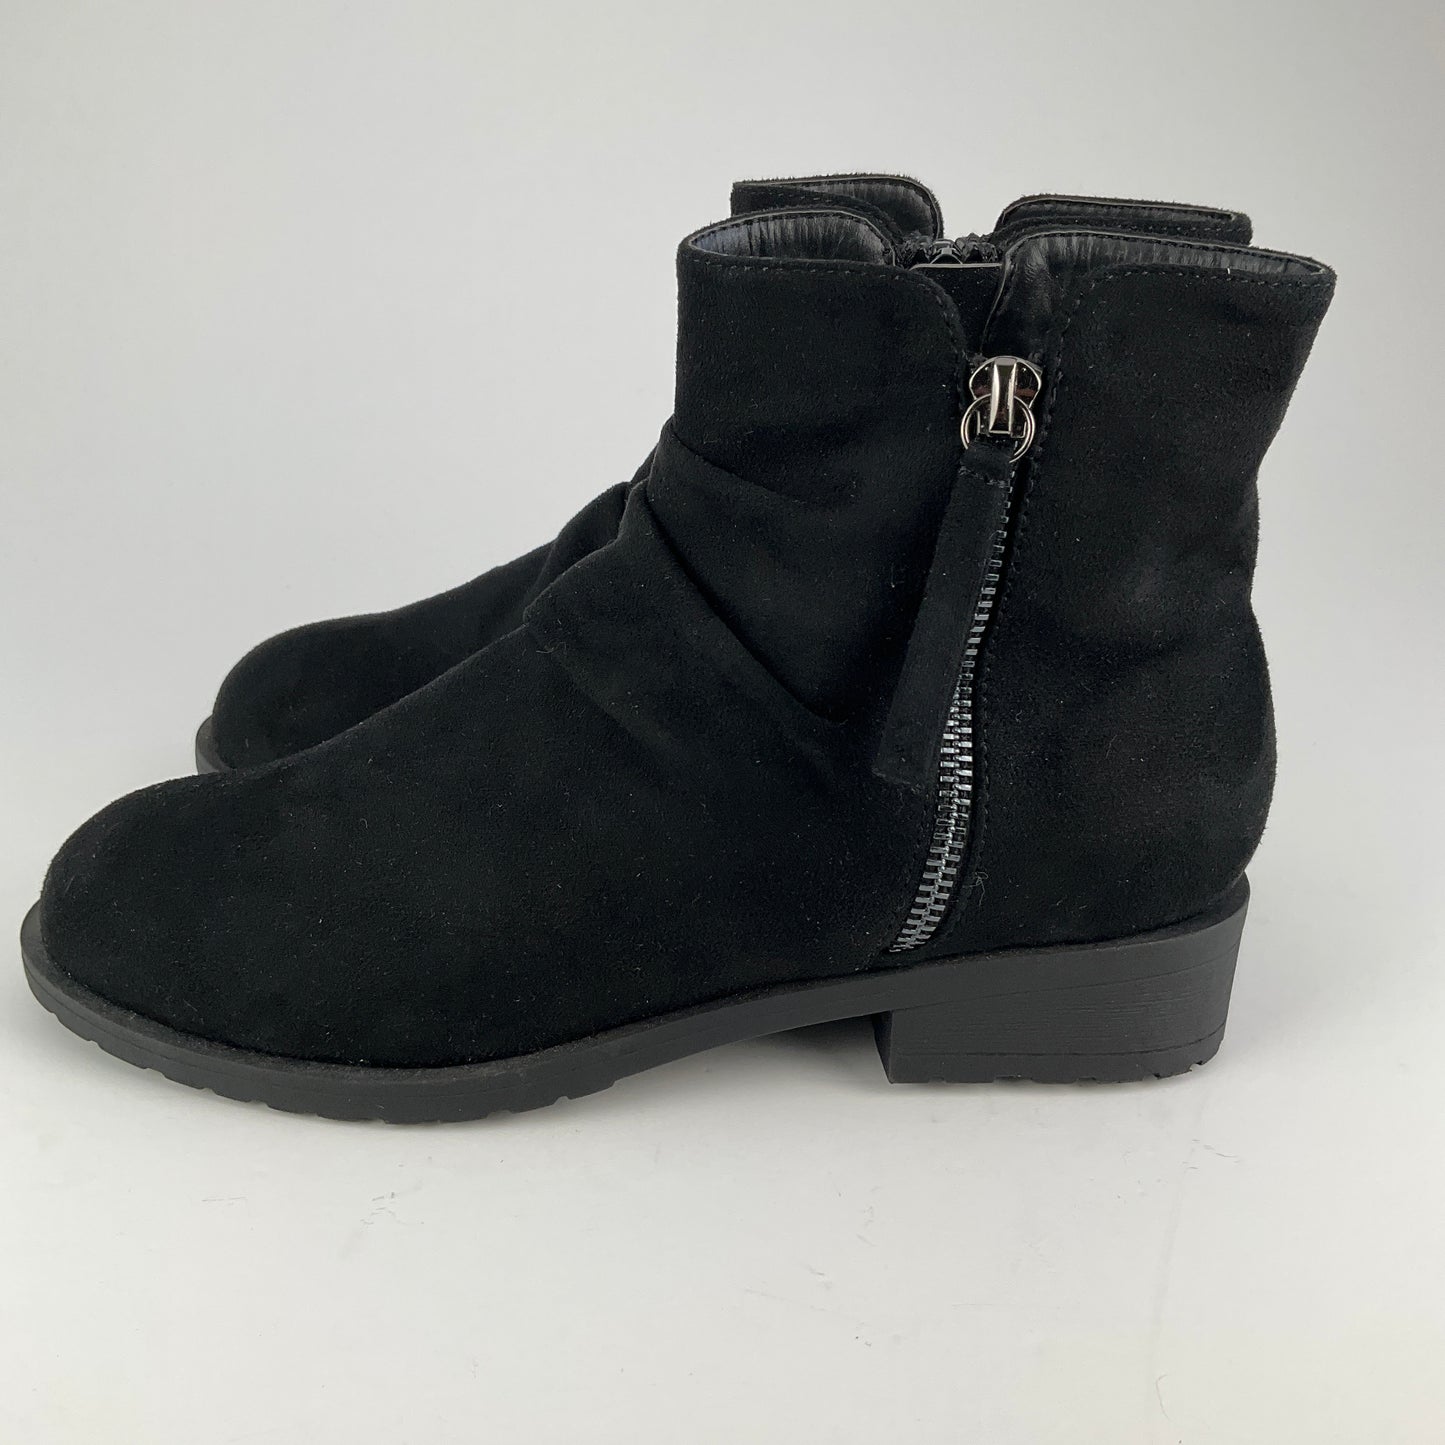 Life & Sole - Ankle Boot - Size 6